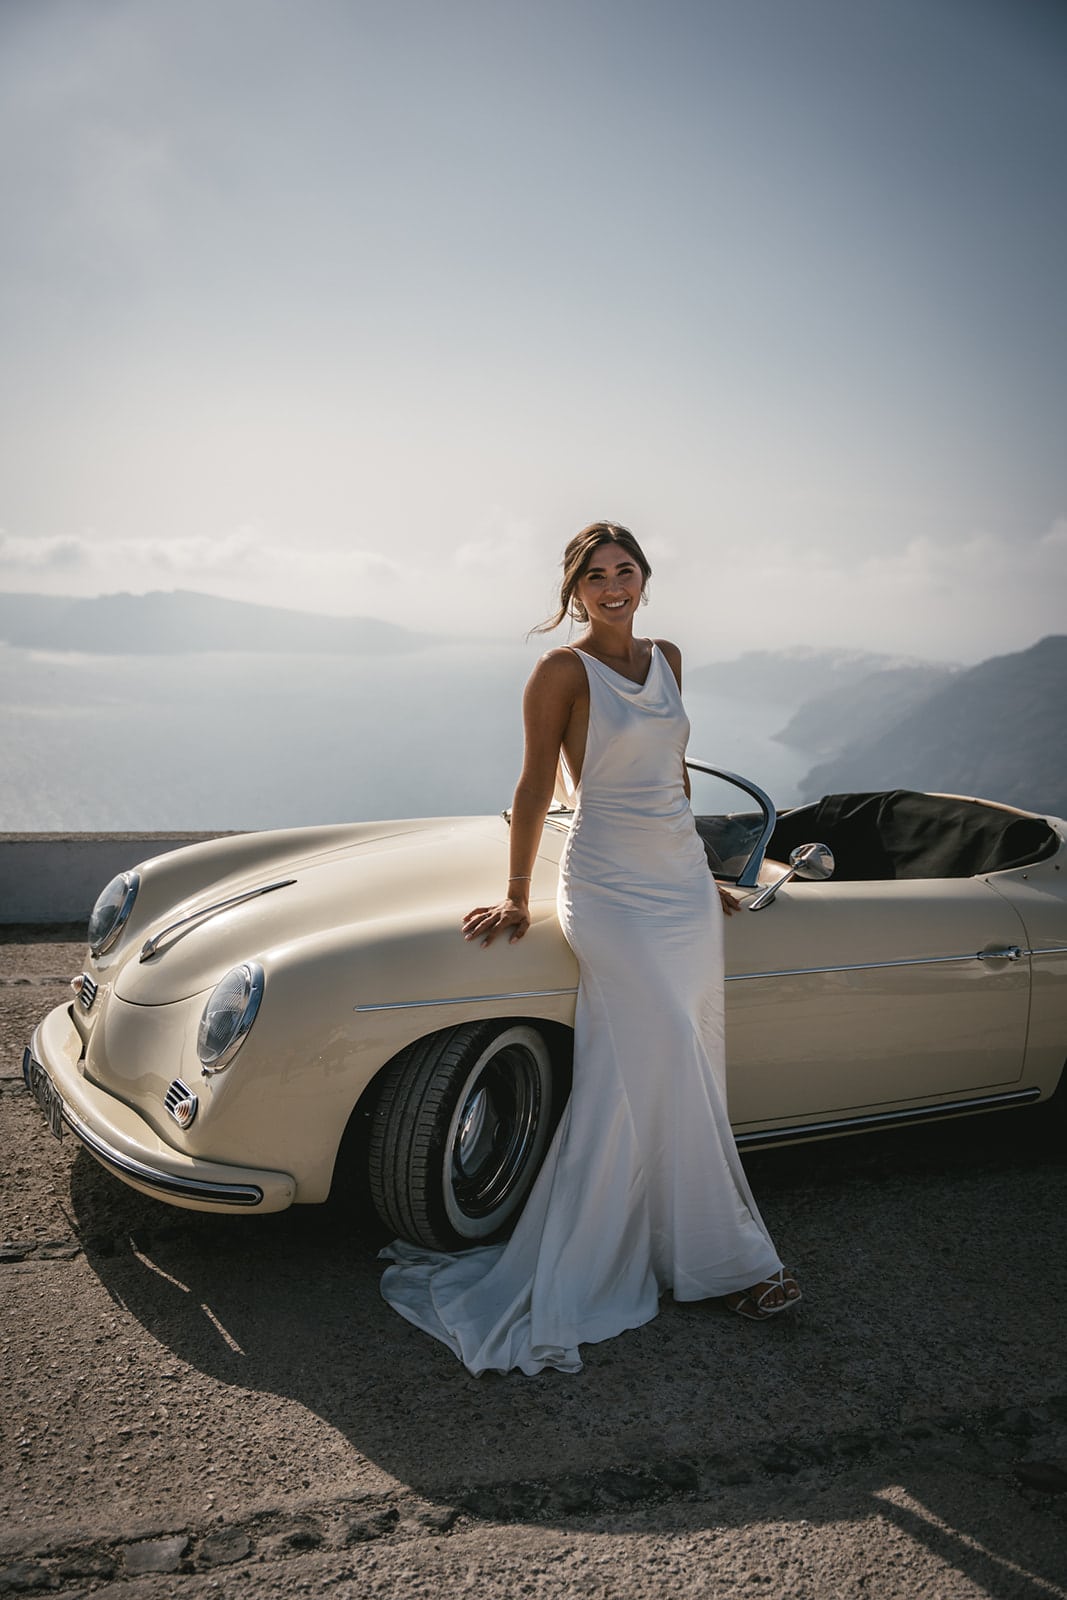 The sea’s expanse witnesses their promise of adventure, framed by the vintage car’s elegance